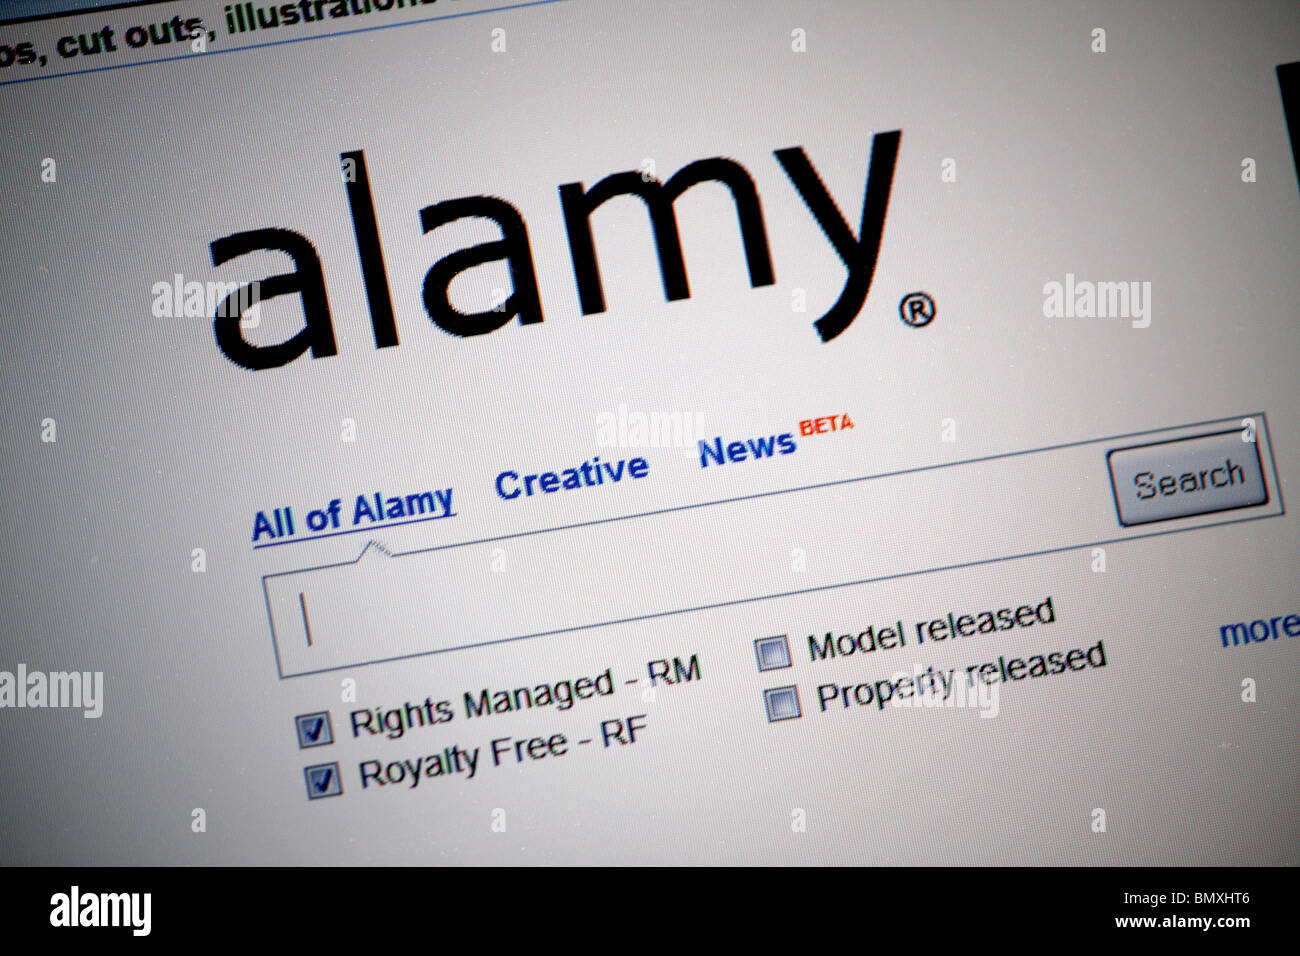 A photograph of the front home page of Alamy Limited website showing stock photography samples and an internal search engine Stock Photo